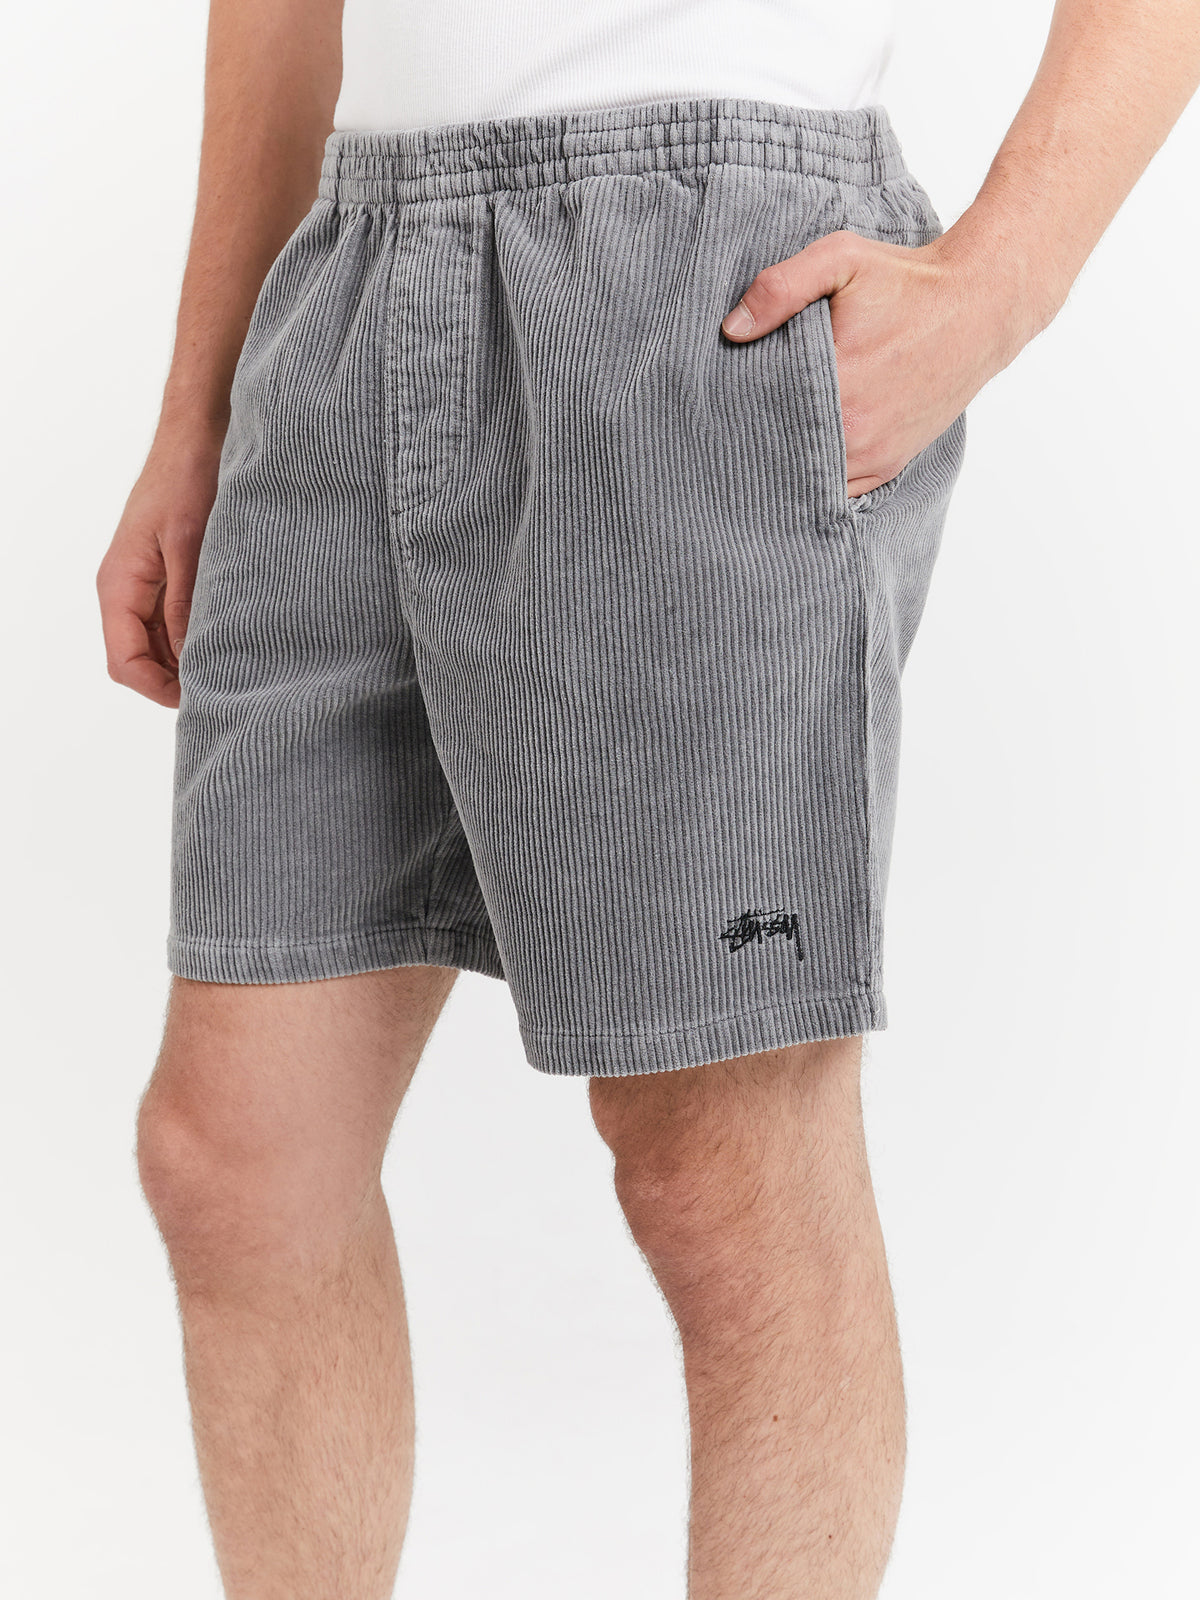 Wide Wale Cord Beachshorts in Pigment Grey